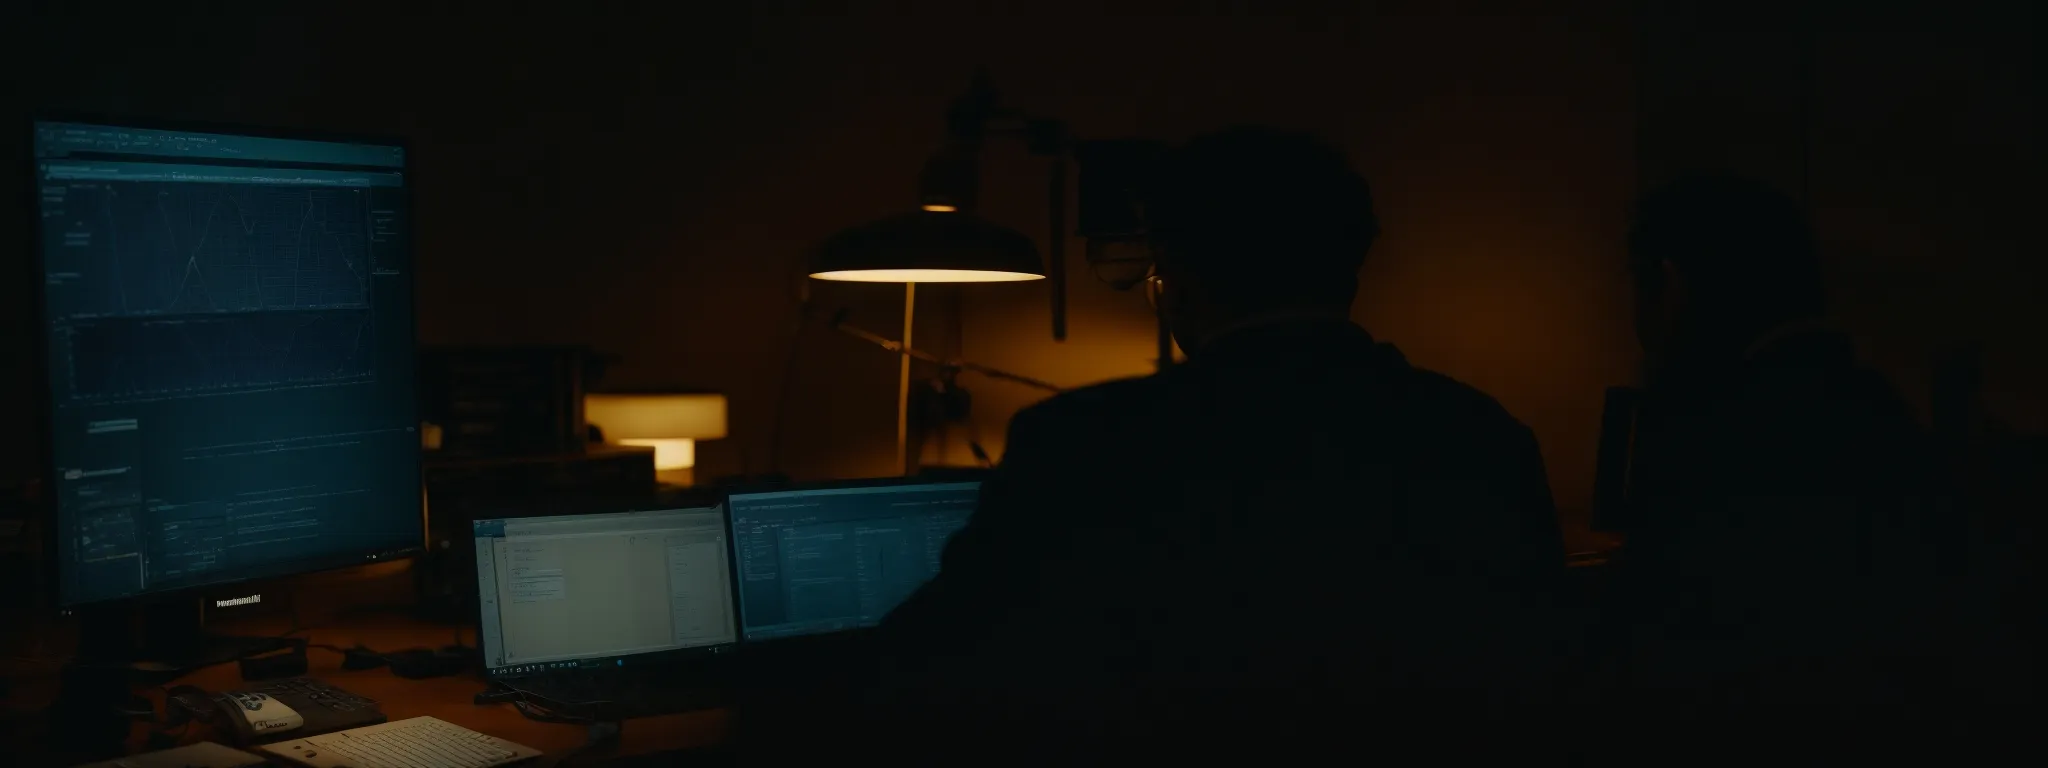 a person sits at a desk illuminated by the soft glow of a computer screen, engrossed in analyzing a web of interconnected topics on the monitor.